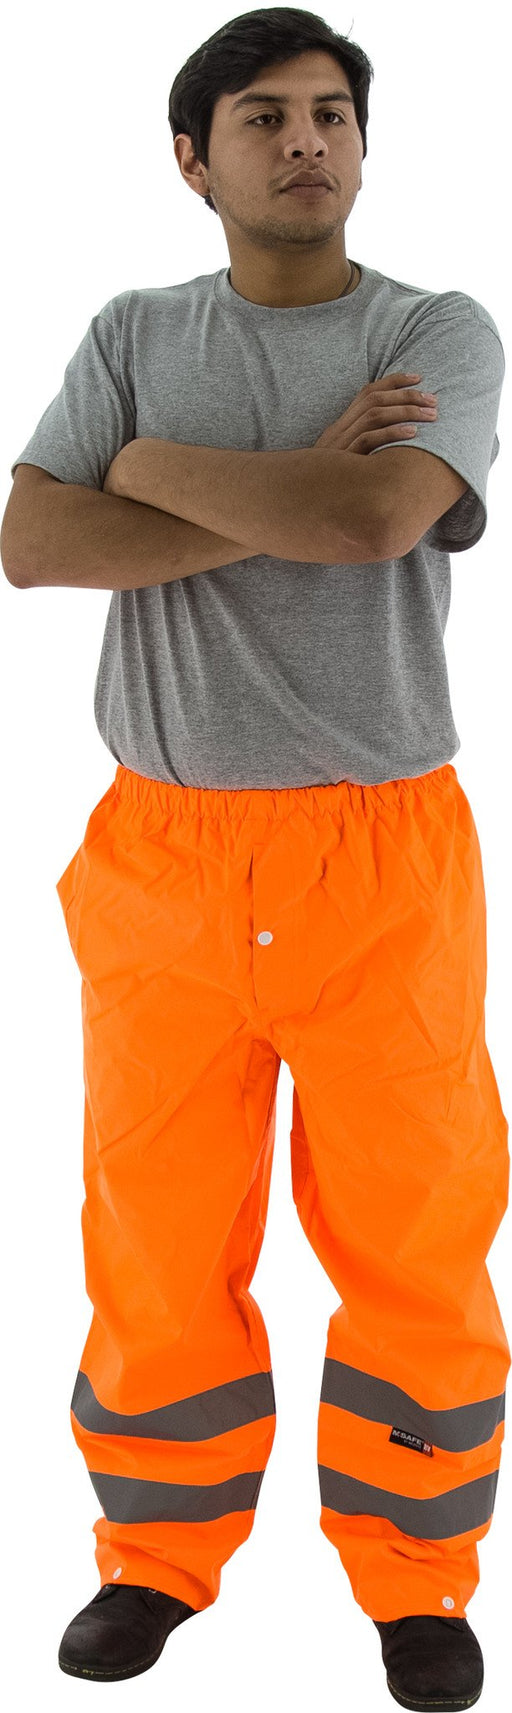 Majestic 75-2352 Hi Vis Orange Trousers ANSI Class E Unlined: Global Construction Supply